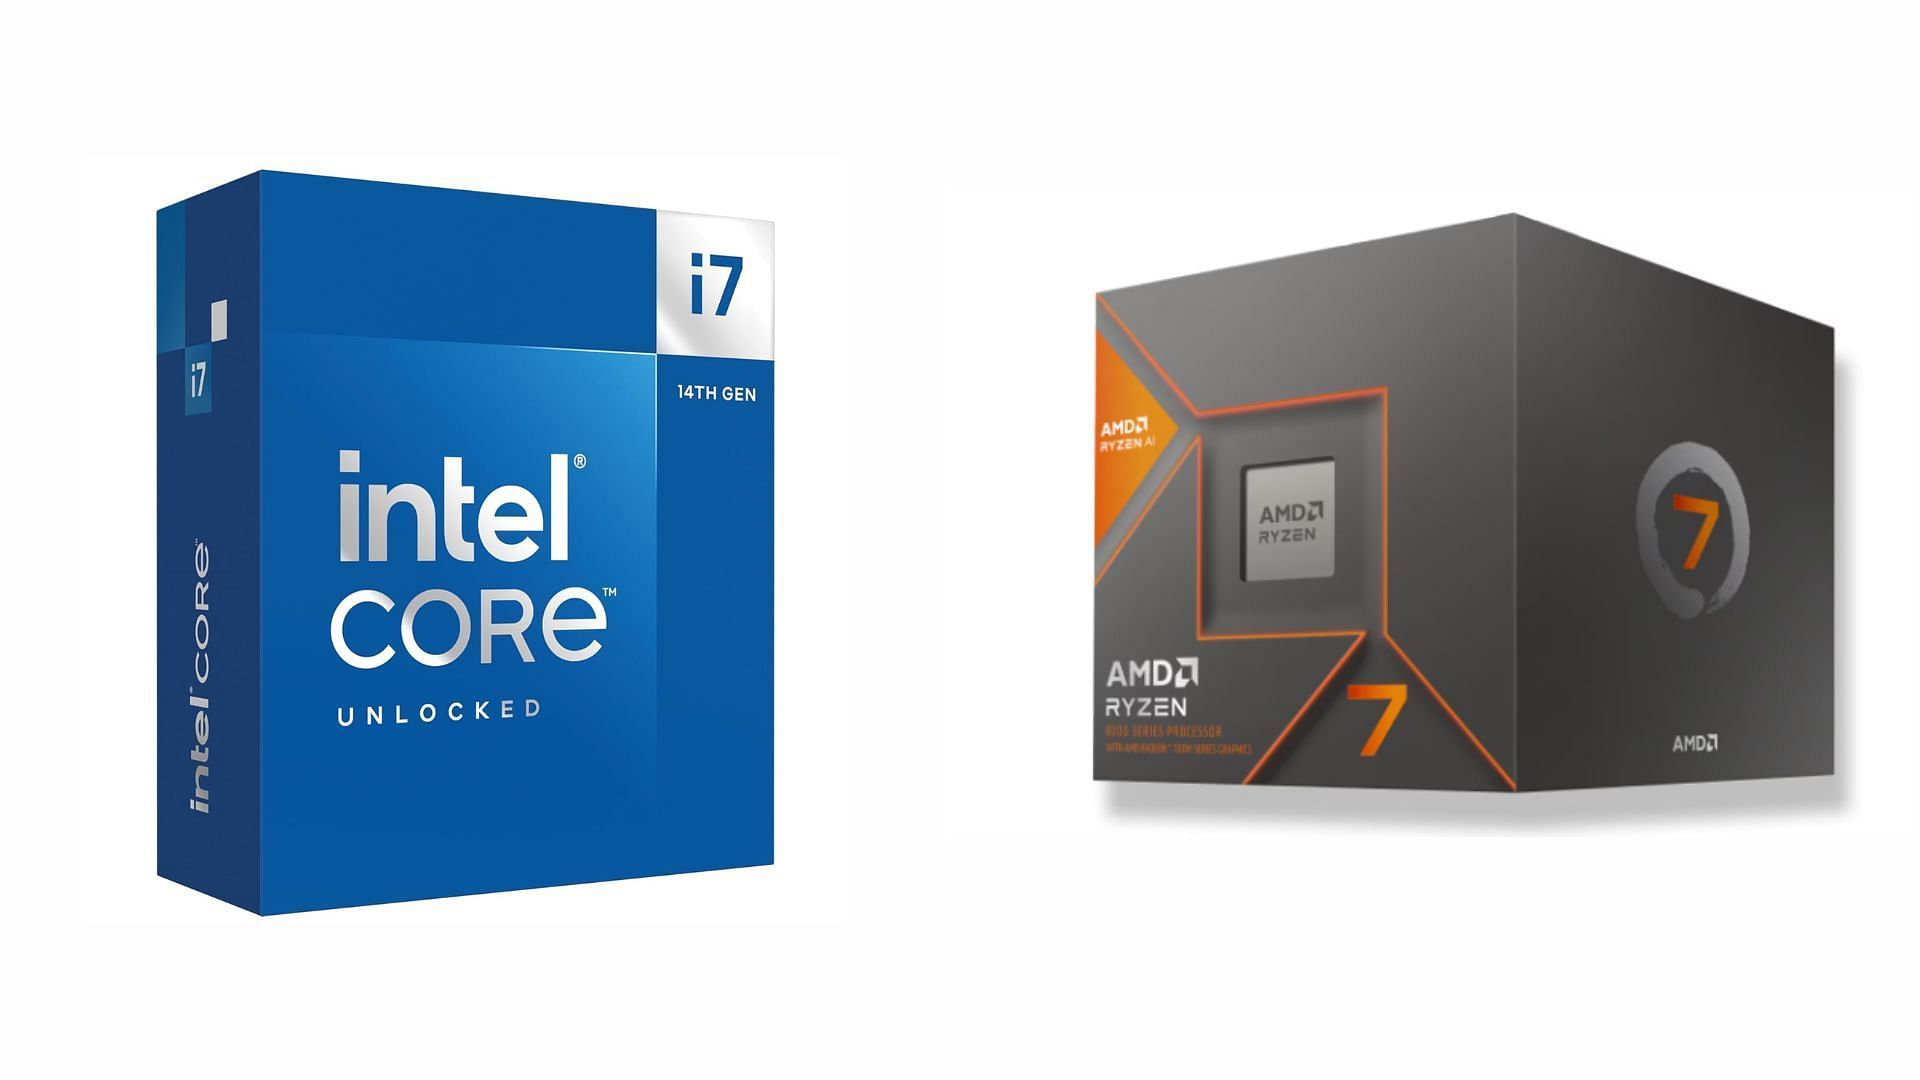 Both the Intel Core i7-14700K and AMD Ryzen 8700G are powerful mid-range CPUs. (Image via Amazon and AMD)